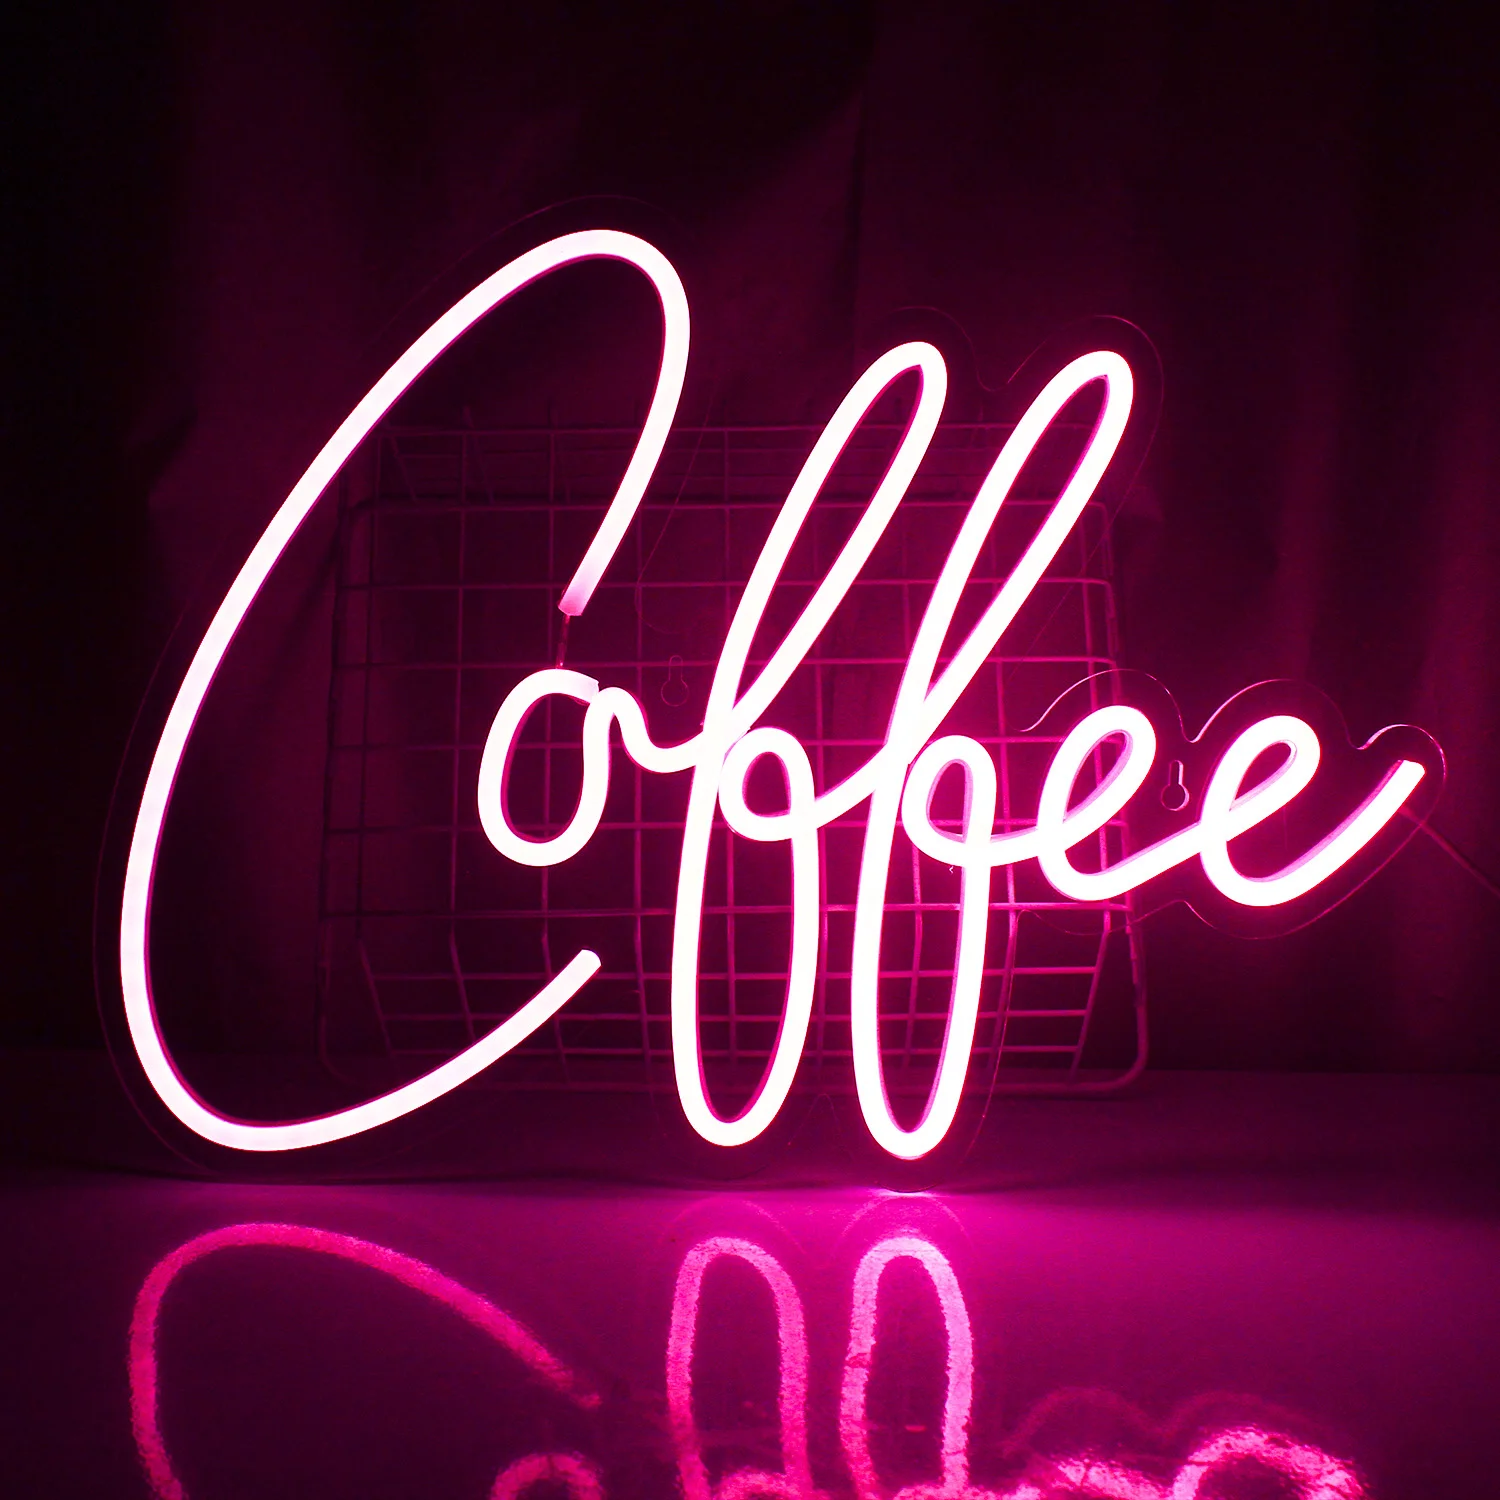 Pink Coffee Shop Neon Sign Led Acrylic Custom Light for Cafe Restaurant Hotel Bar Club Party Beautiful  Decorate Neon Light happy birthday led neon light transparent acrylic glow happy birthday neon sign for wedding party wall hang decorate gift